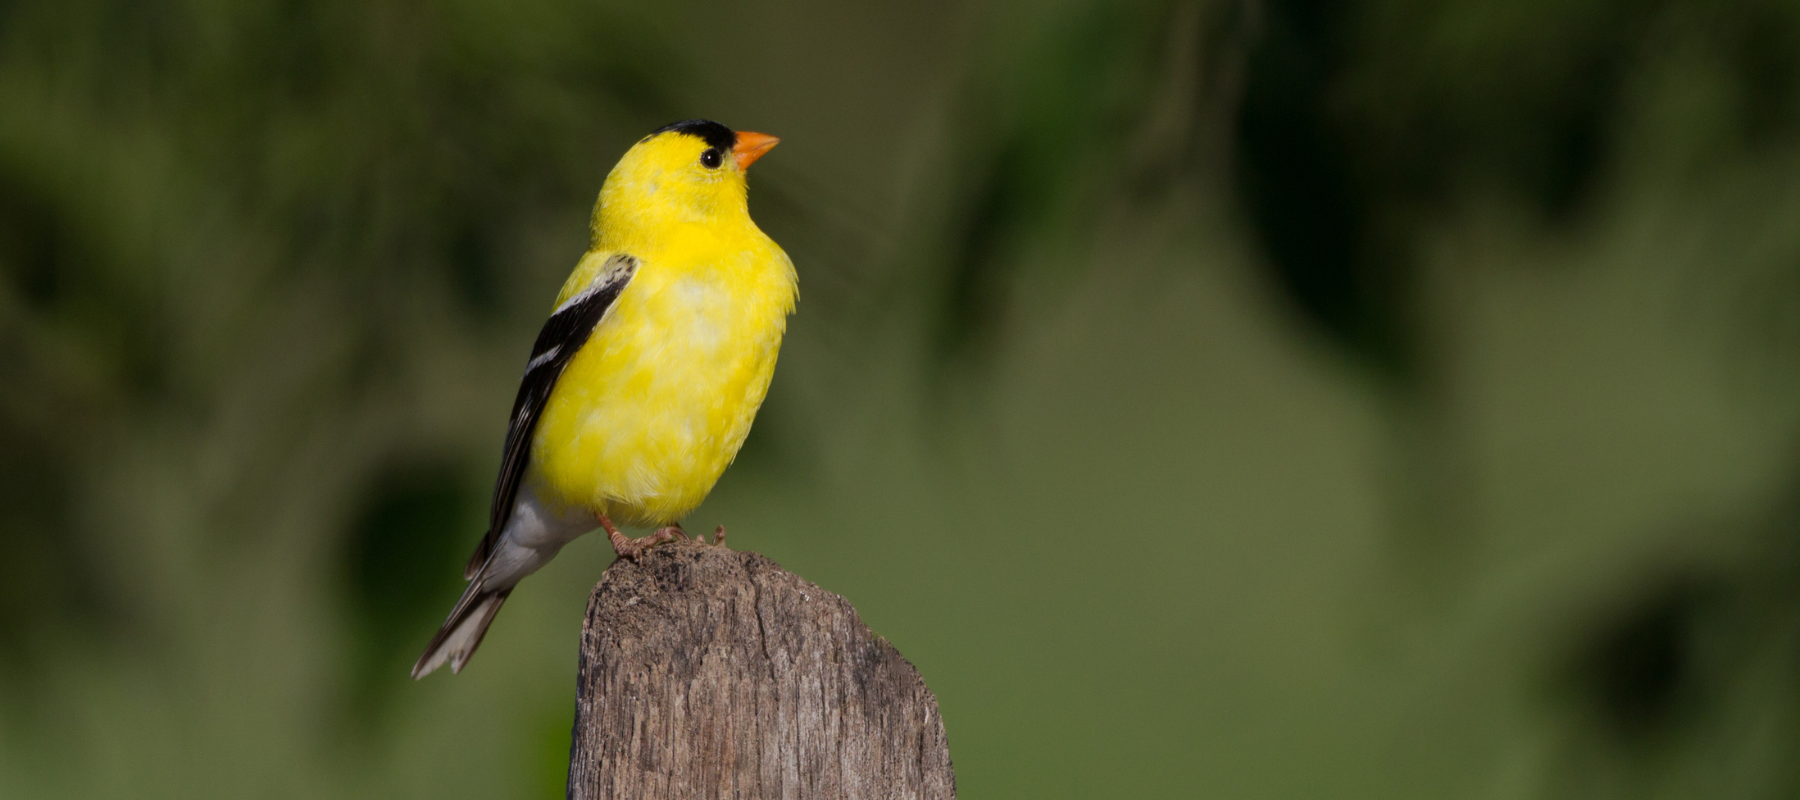 A Guide to Attracting Finches to Your Backyard